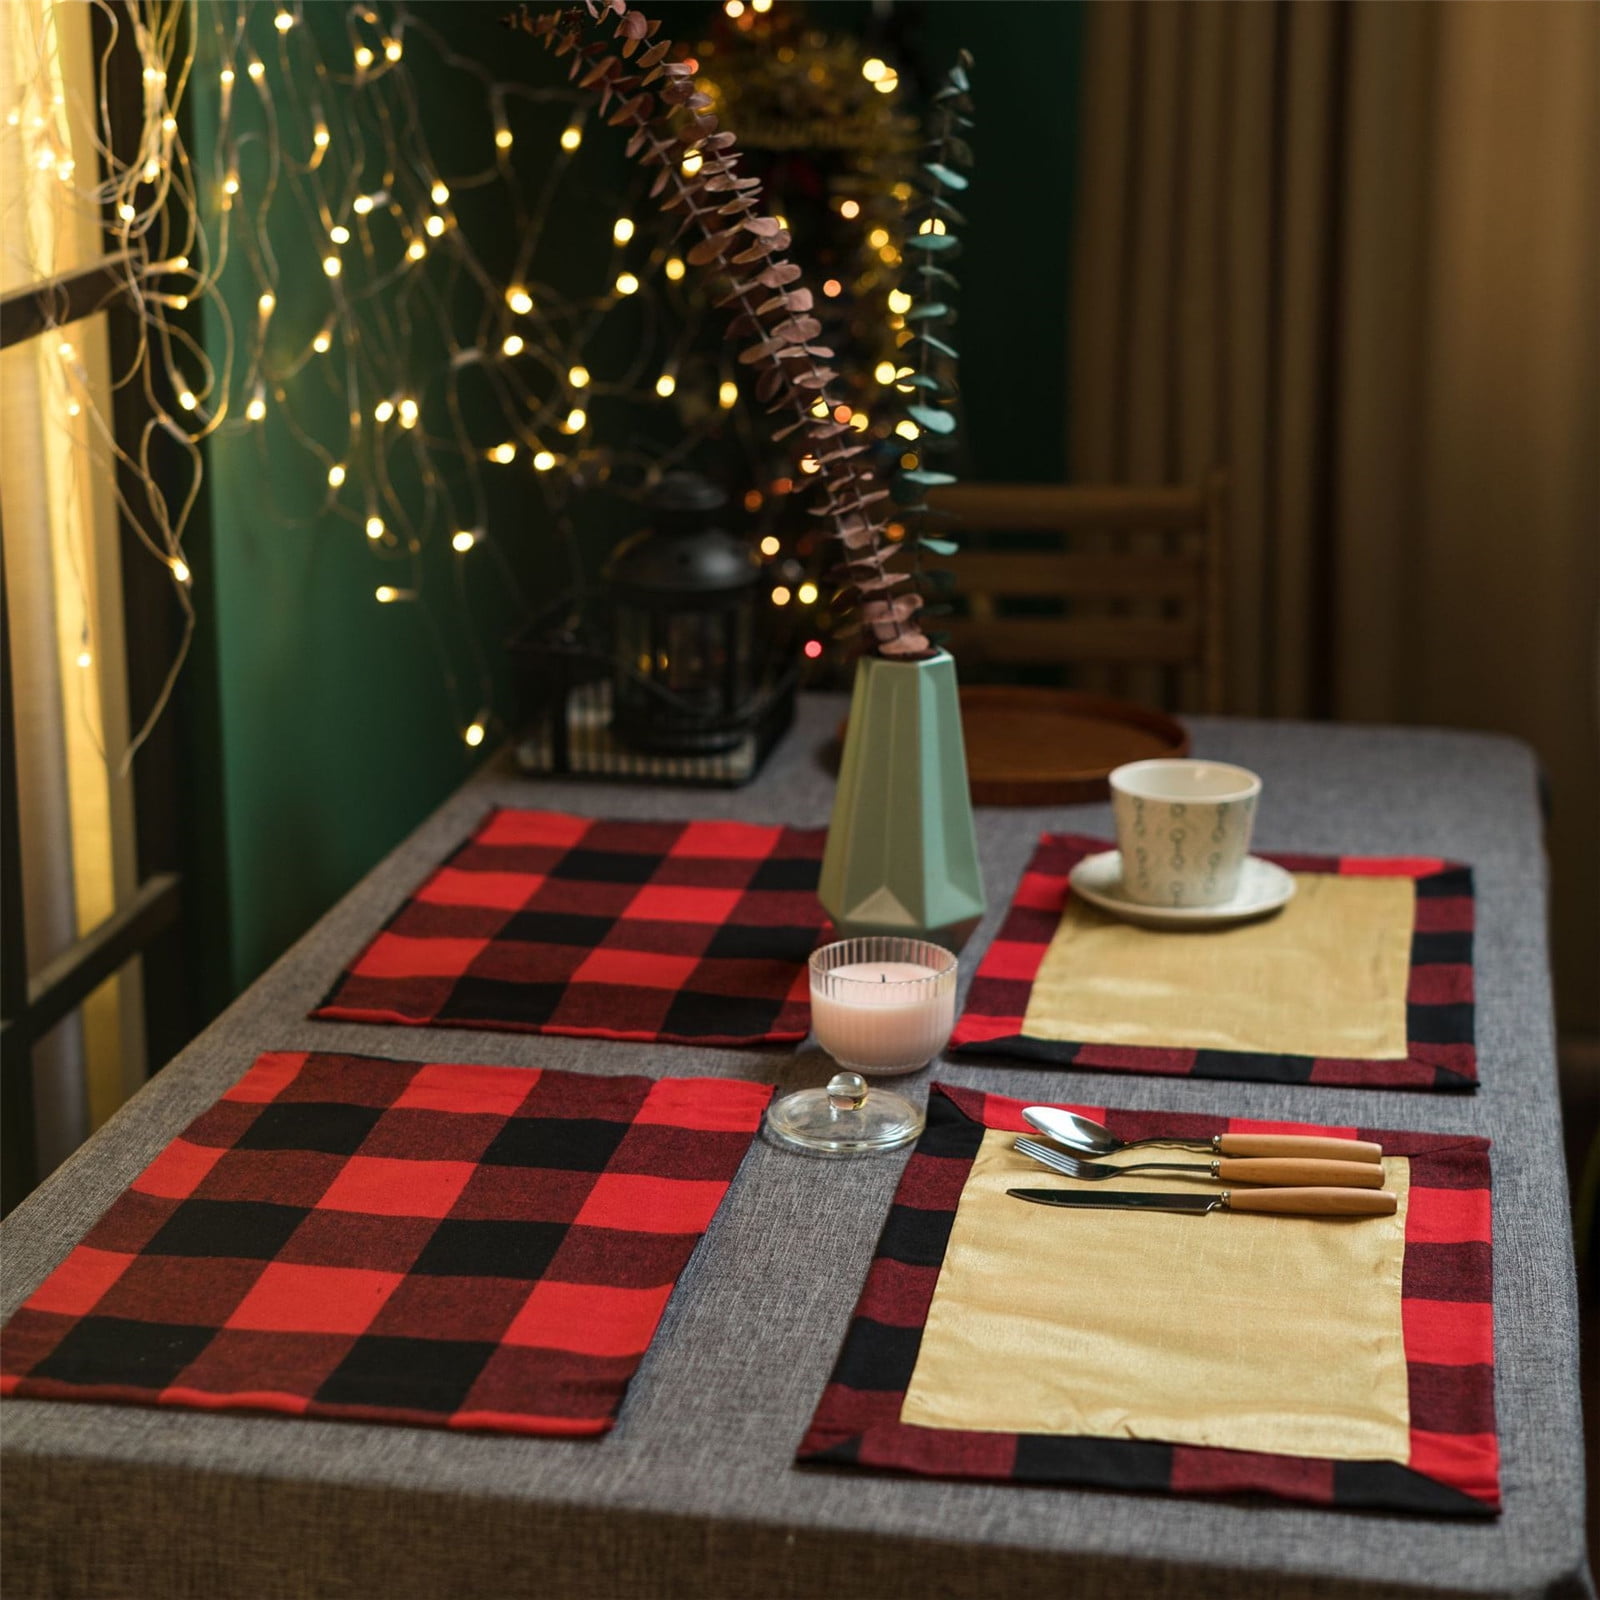 Clean Table Mats for Table Decorations EPSLT Cotton & Burlap Buffalo Check Placemats Red and Black Christmas Placemats Set of 6 Waterproof and Easy 